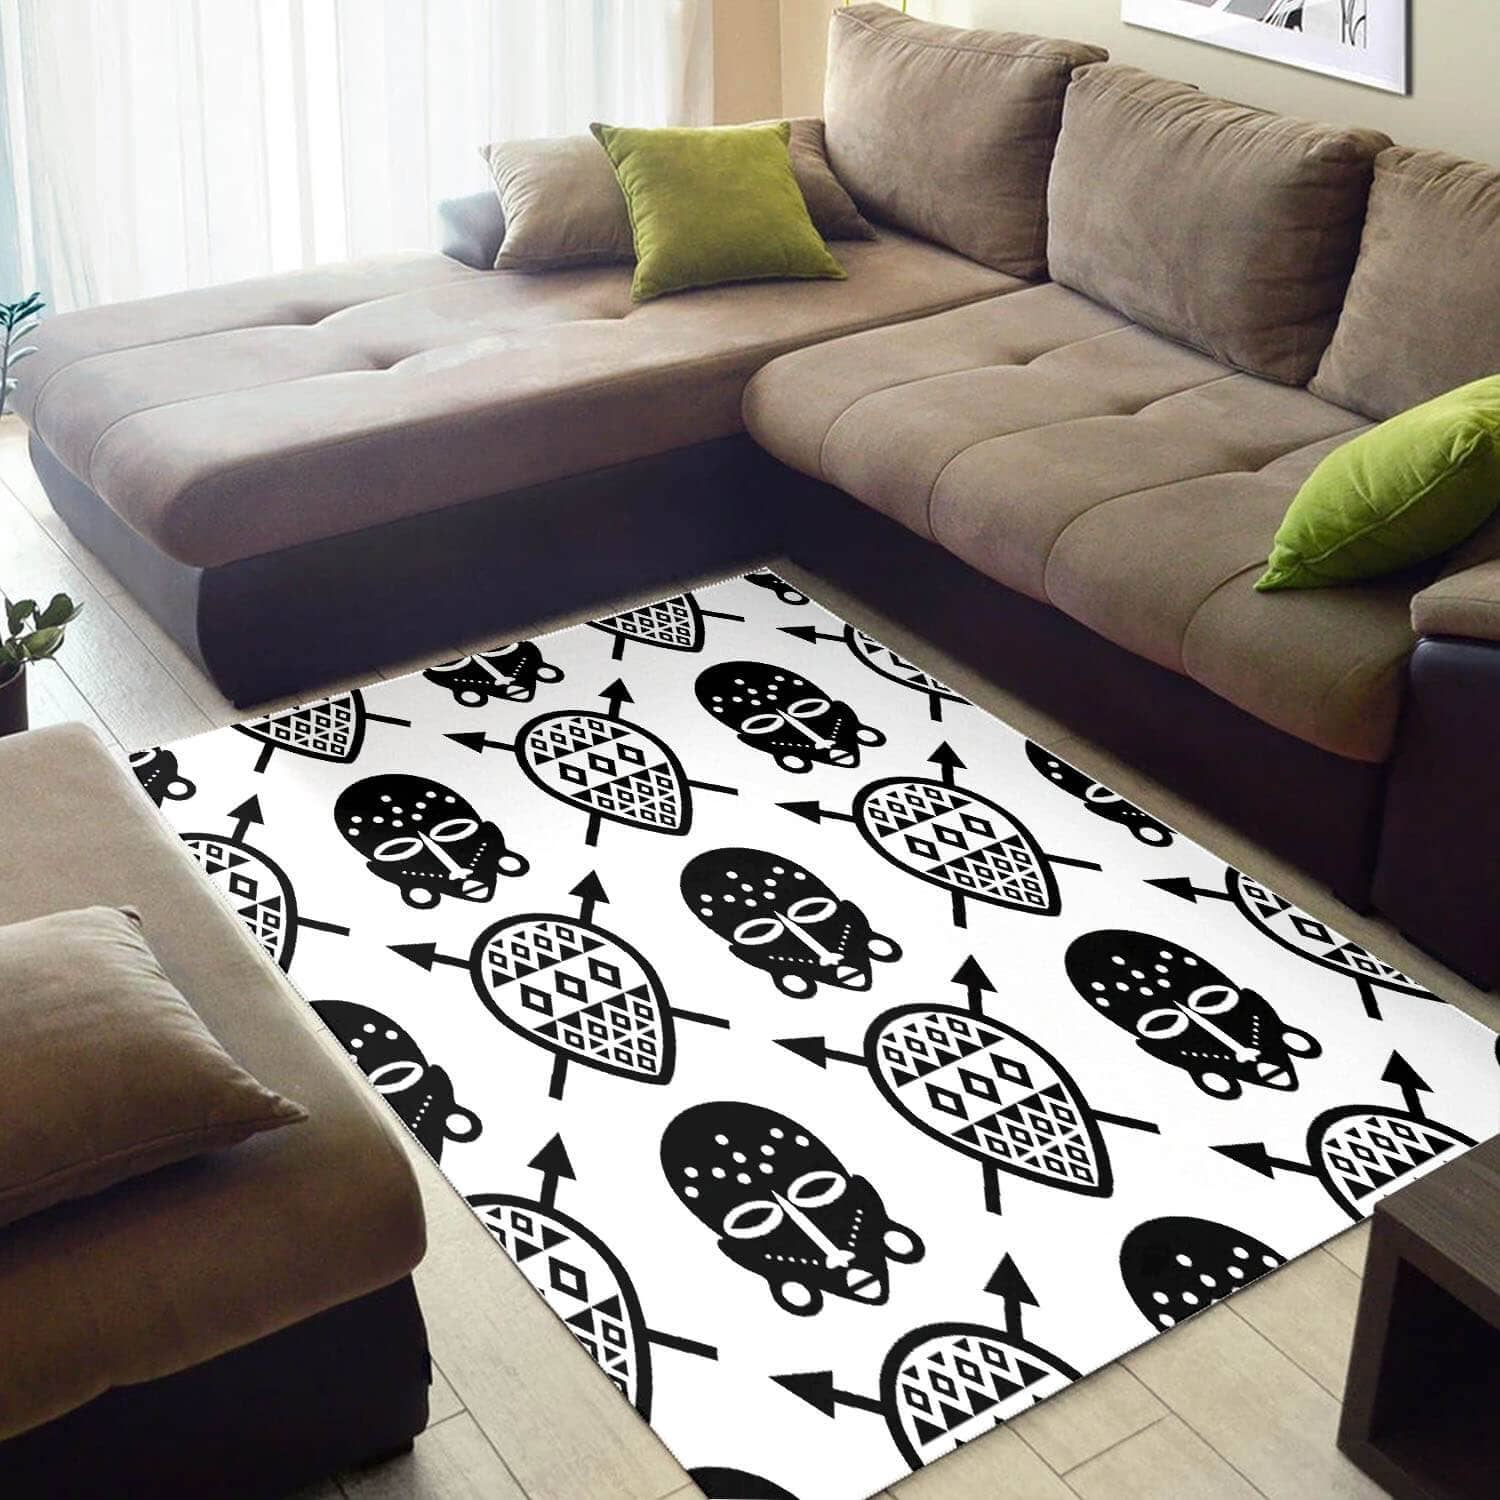 Beautiful African Colorful Black History Month Ethnic Seamless Pattern Large Carpet Living Room Rug